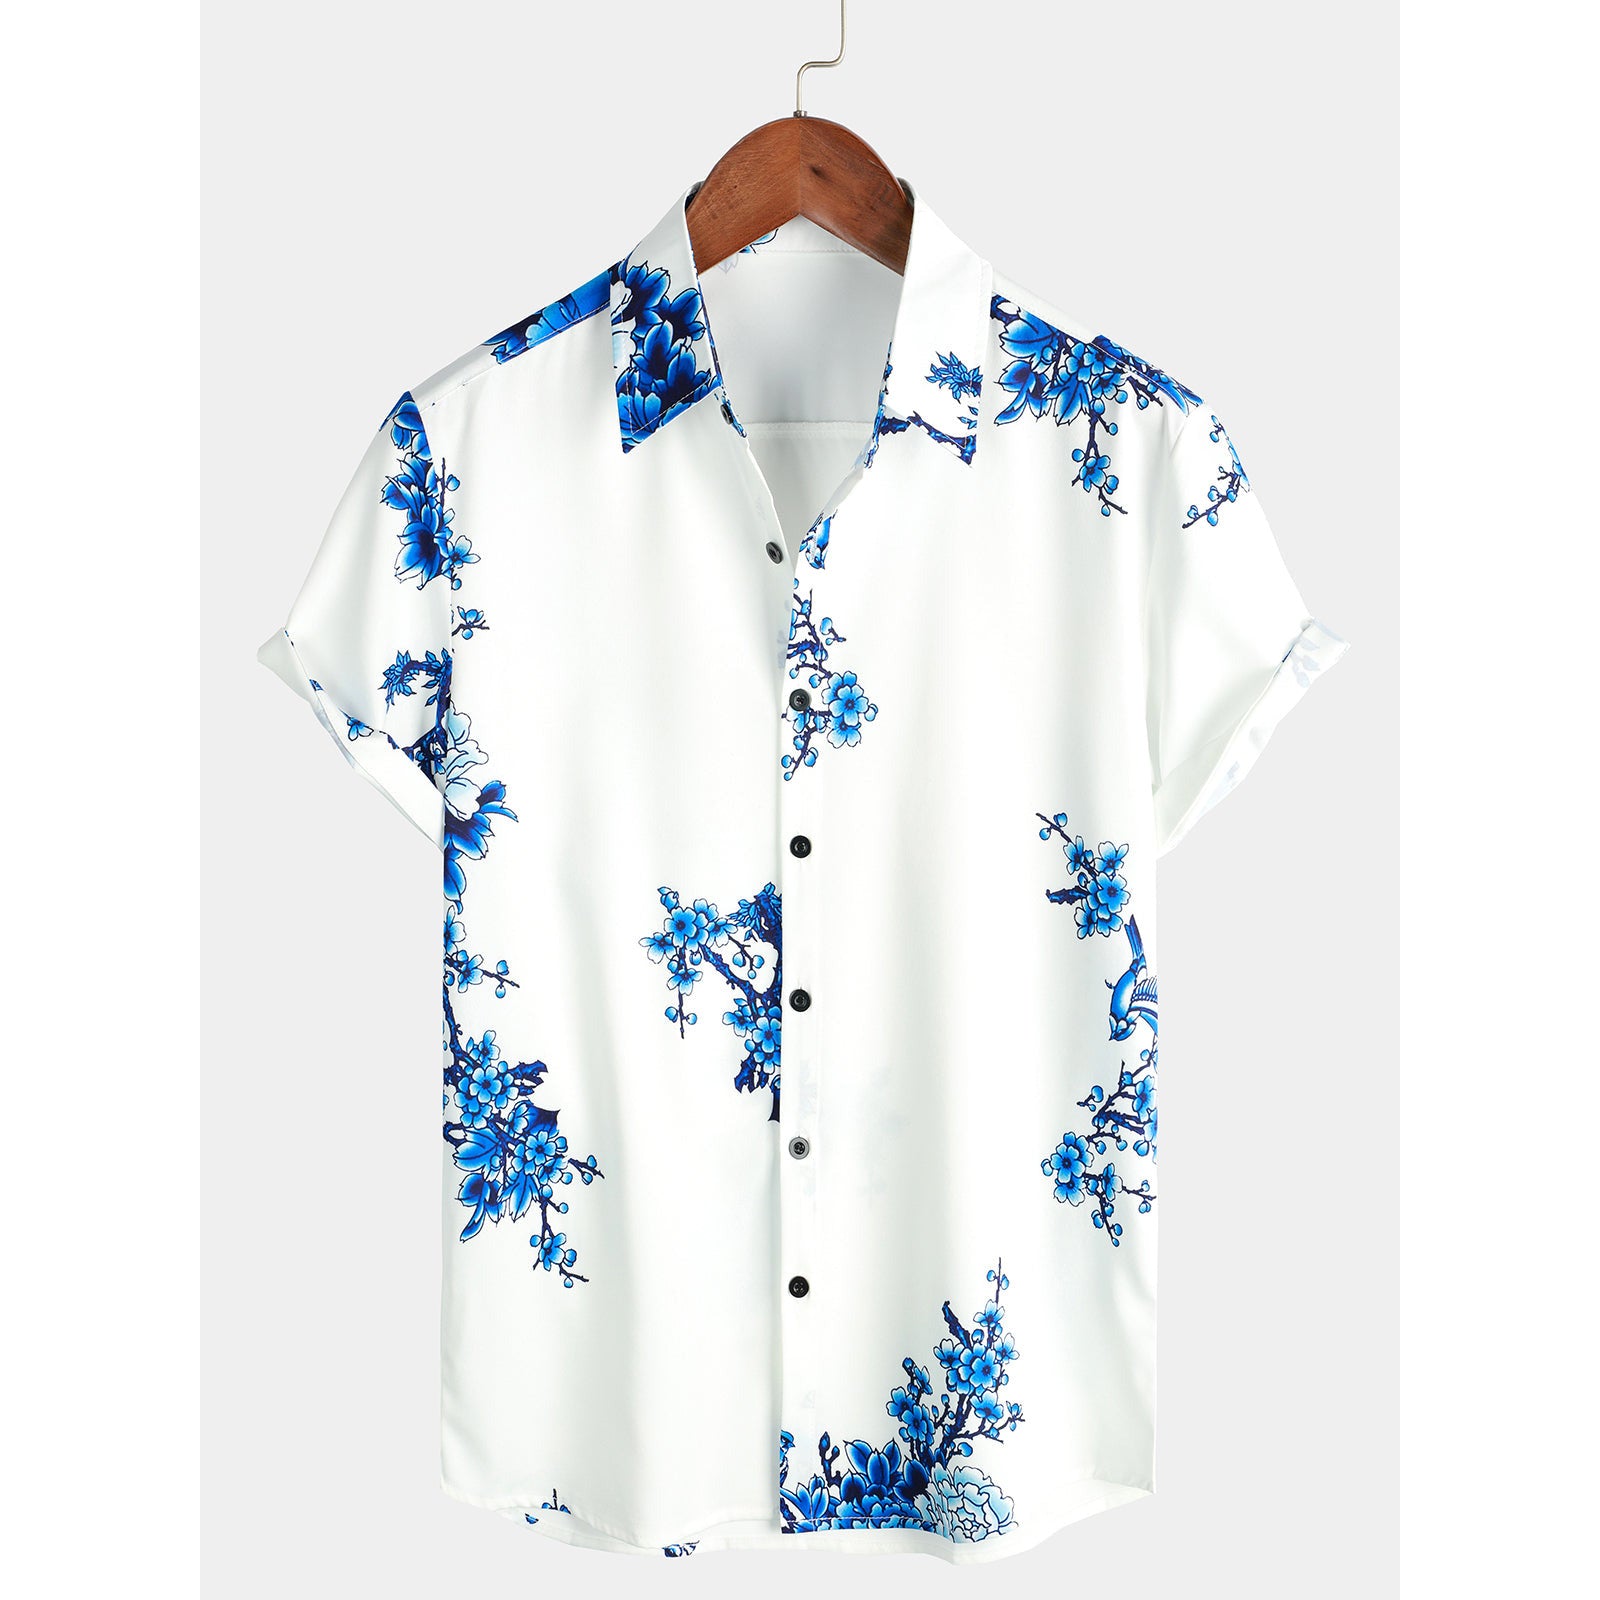 Men's Blue Floral Printed Button Up Casual Short Sleeve Shirt